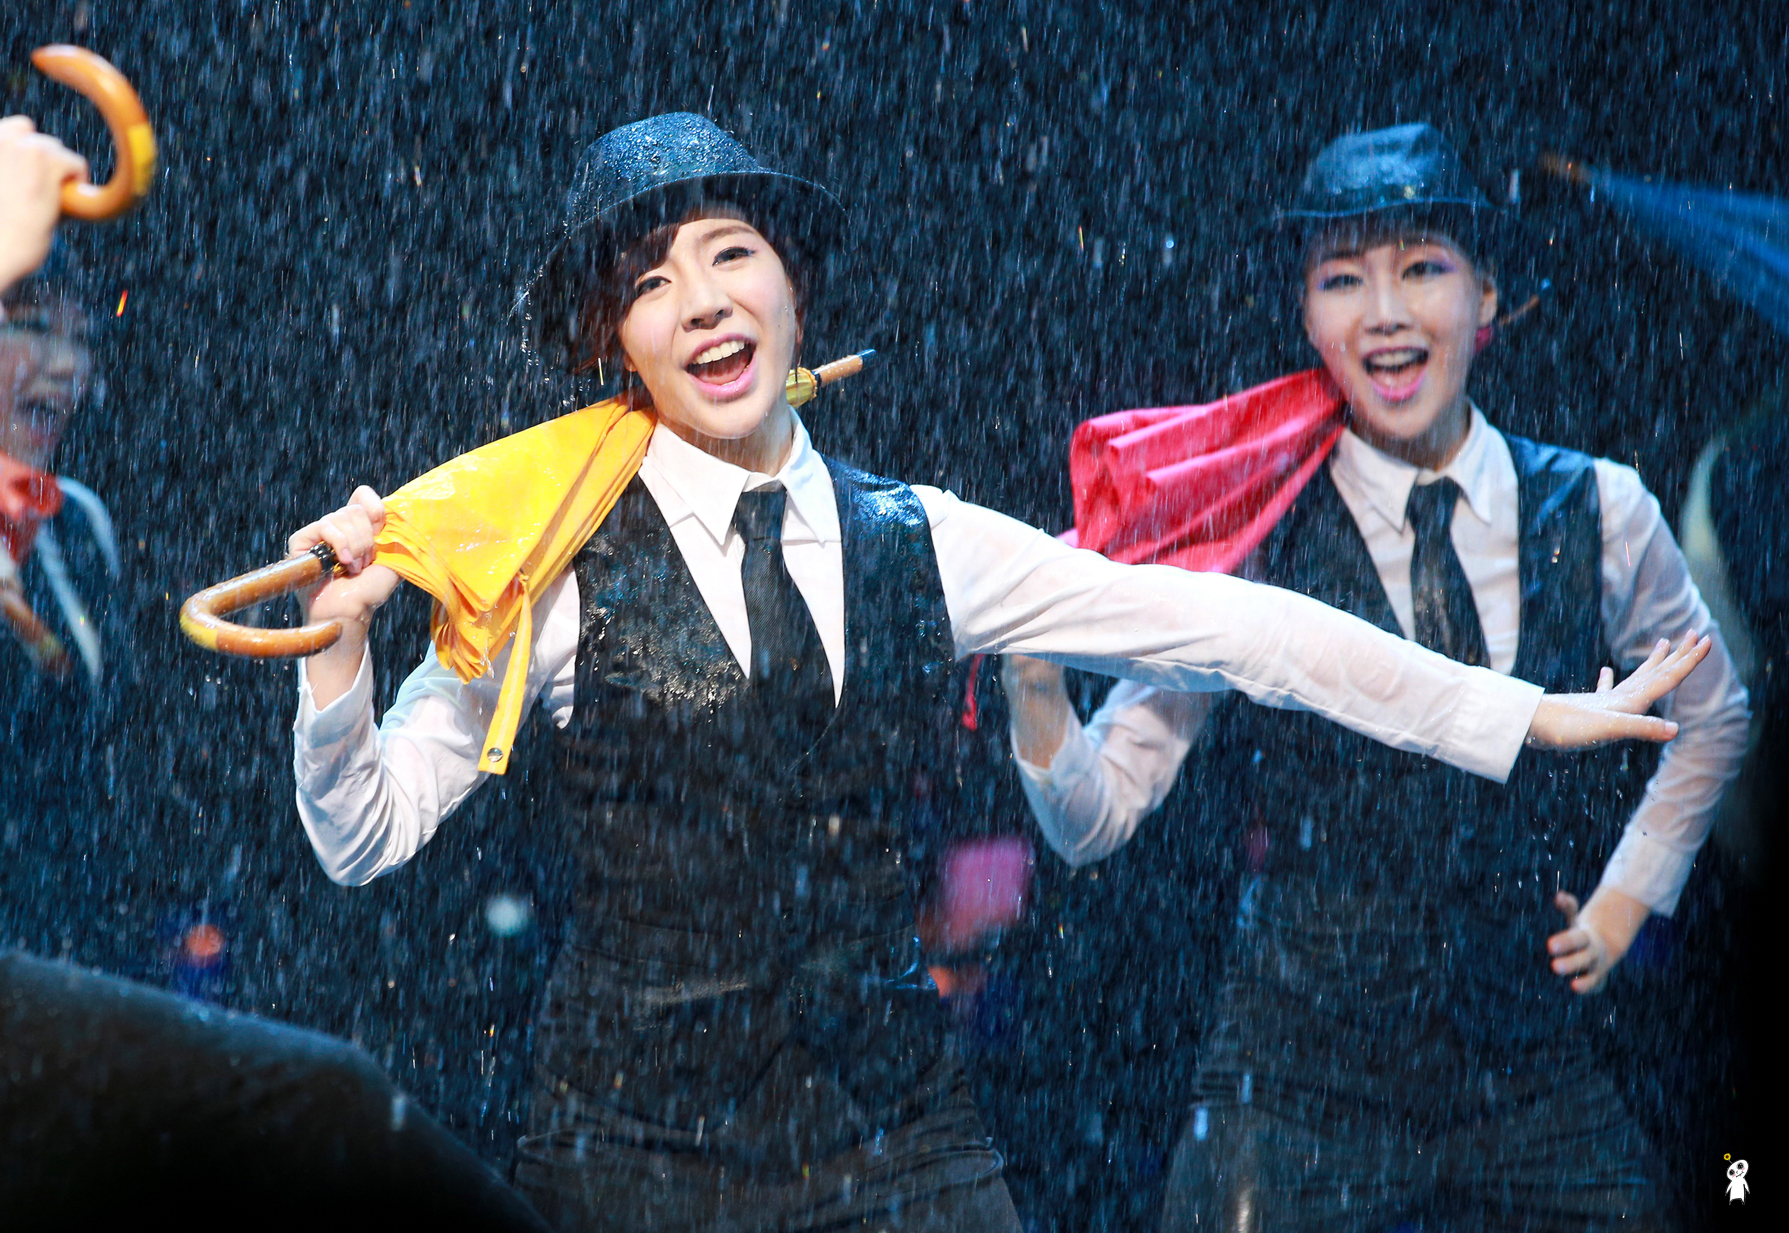 [OTHER][29-04-2014]Sunny sẽ tham gia vở nhạc kịch "SINGIN' IN THE RAIN" - Page 6 2405A43953DAEFB1167DEF